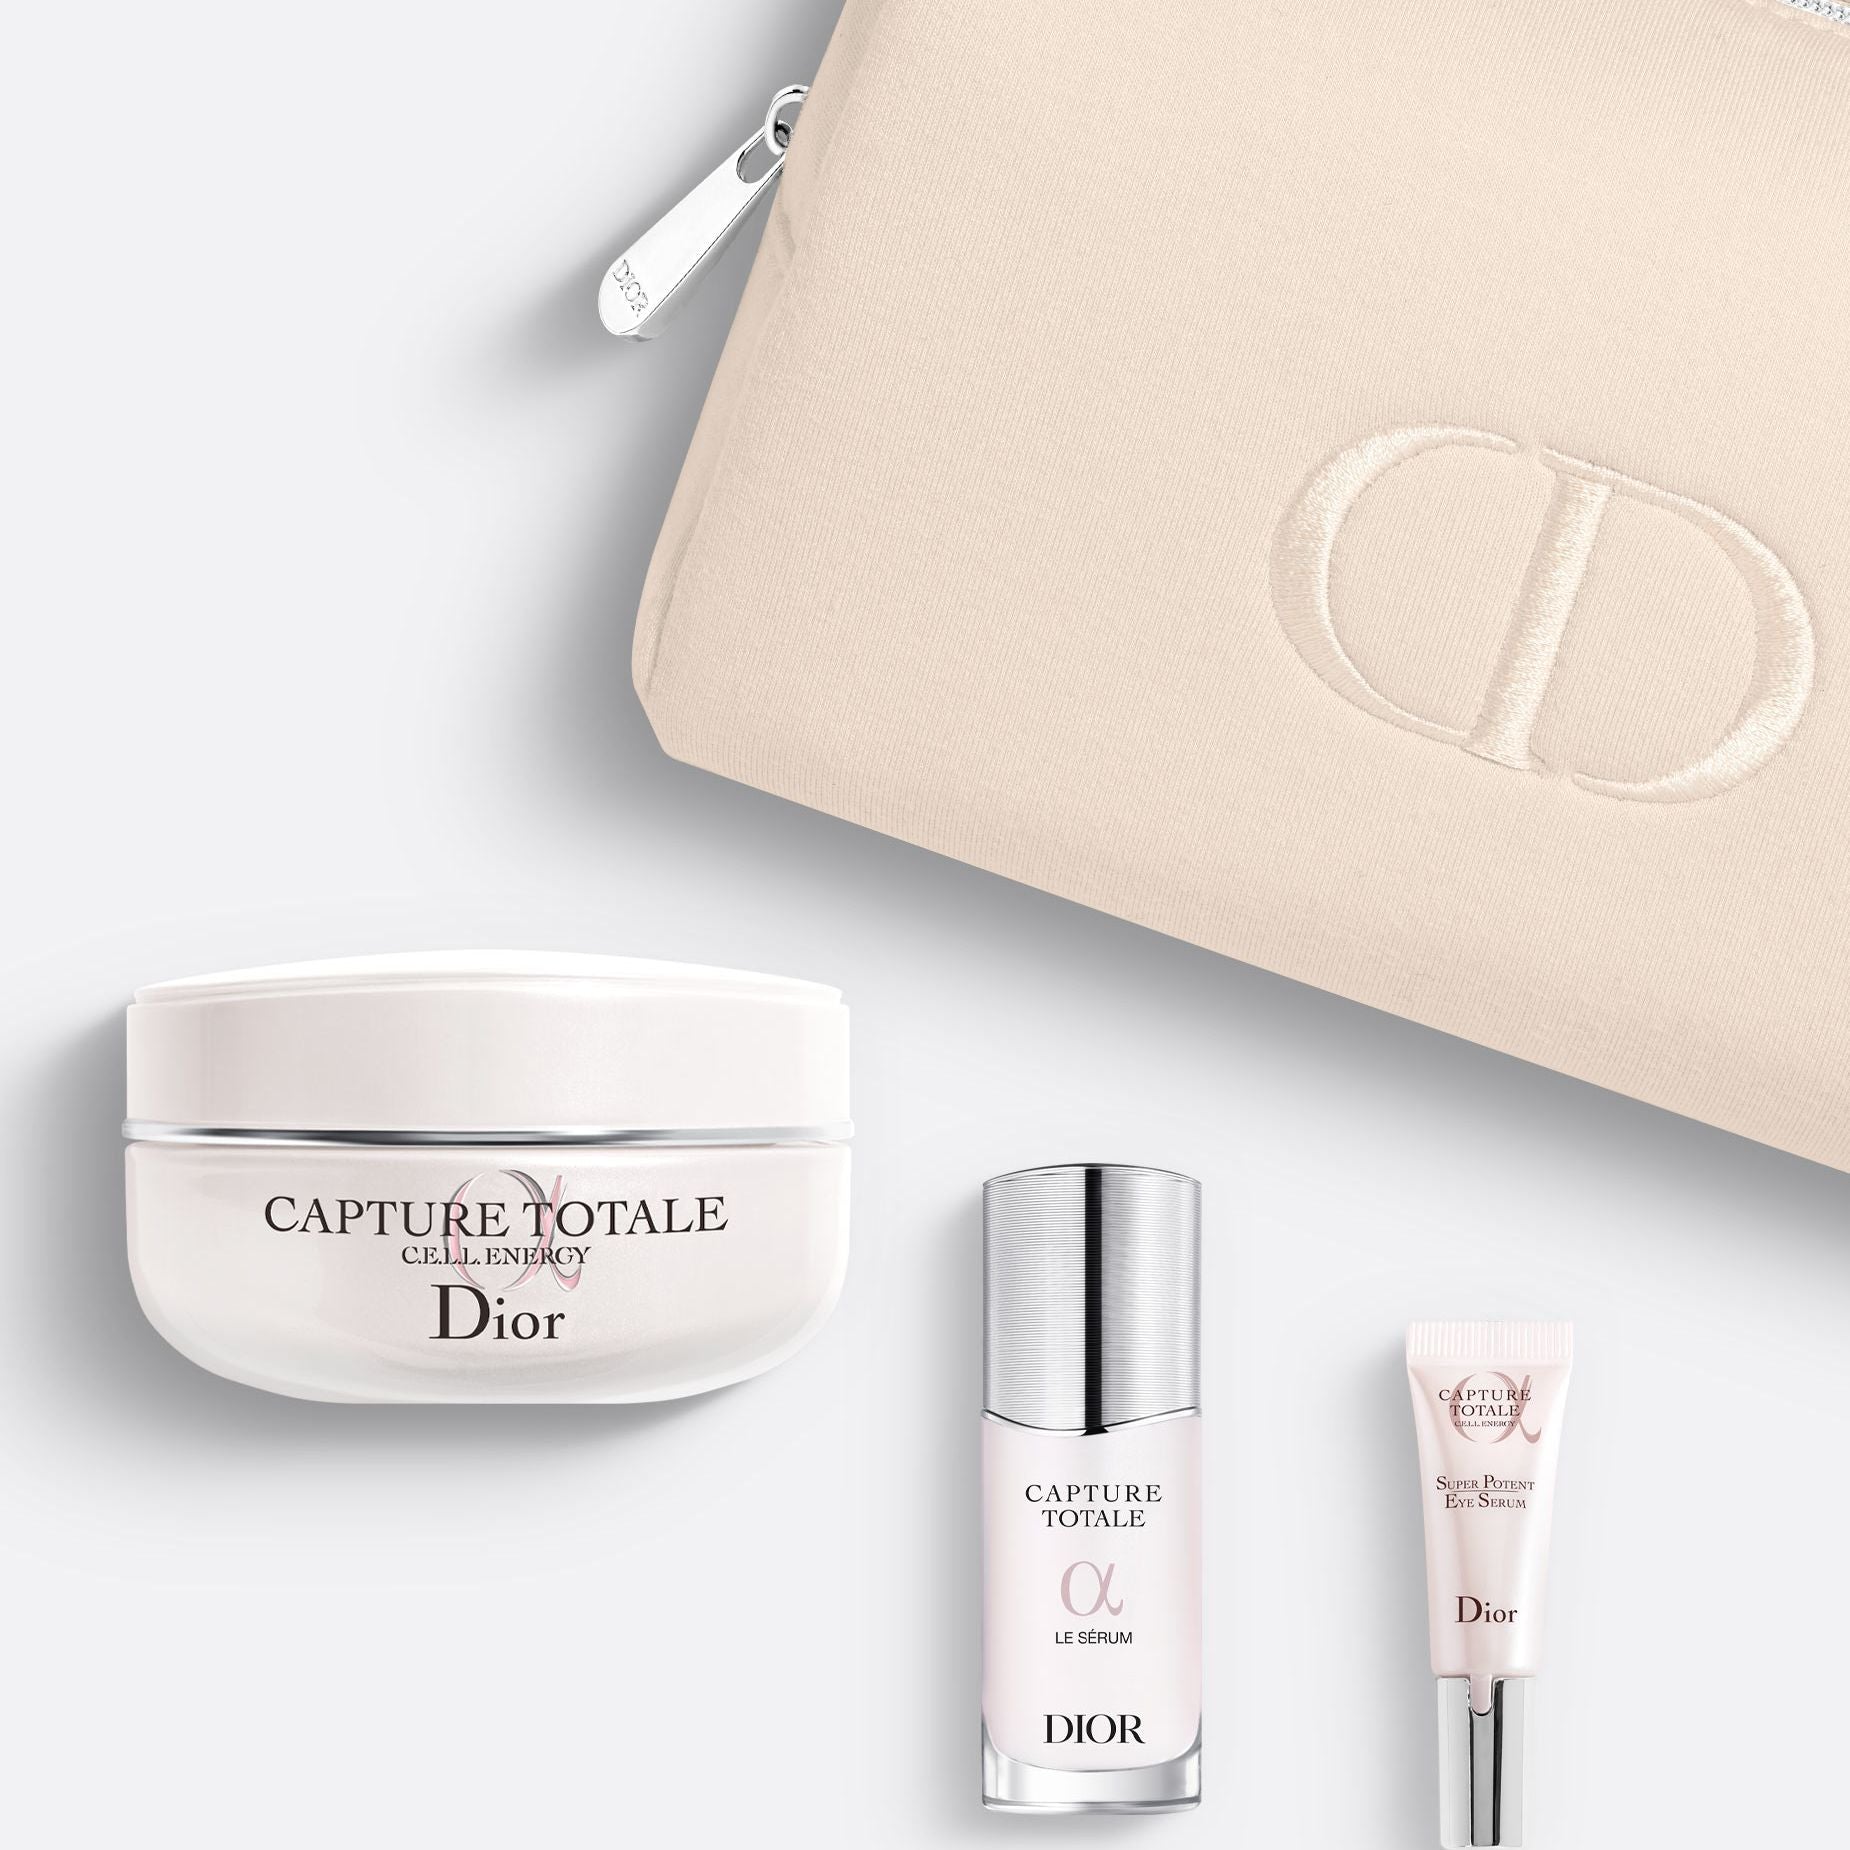 CAPTURE TOTALE POUCH  CREME ~ Offer The Youth-Revealing Ritual - Selection of 3 Firming Skincare Products